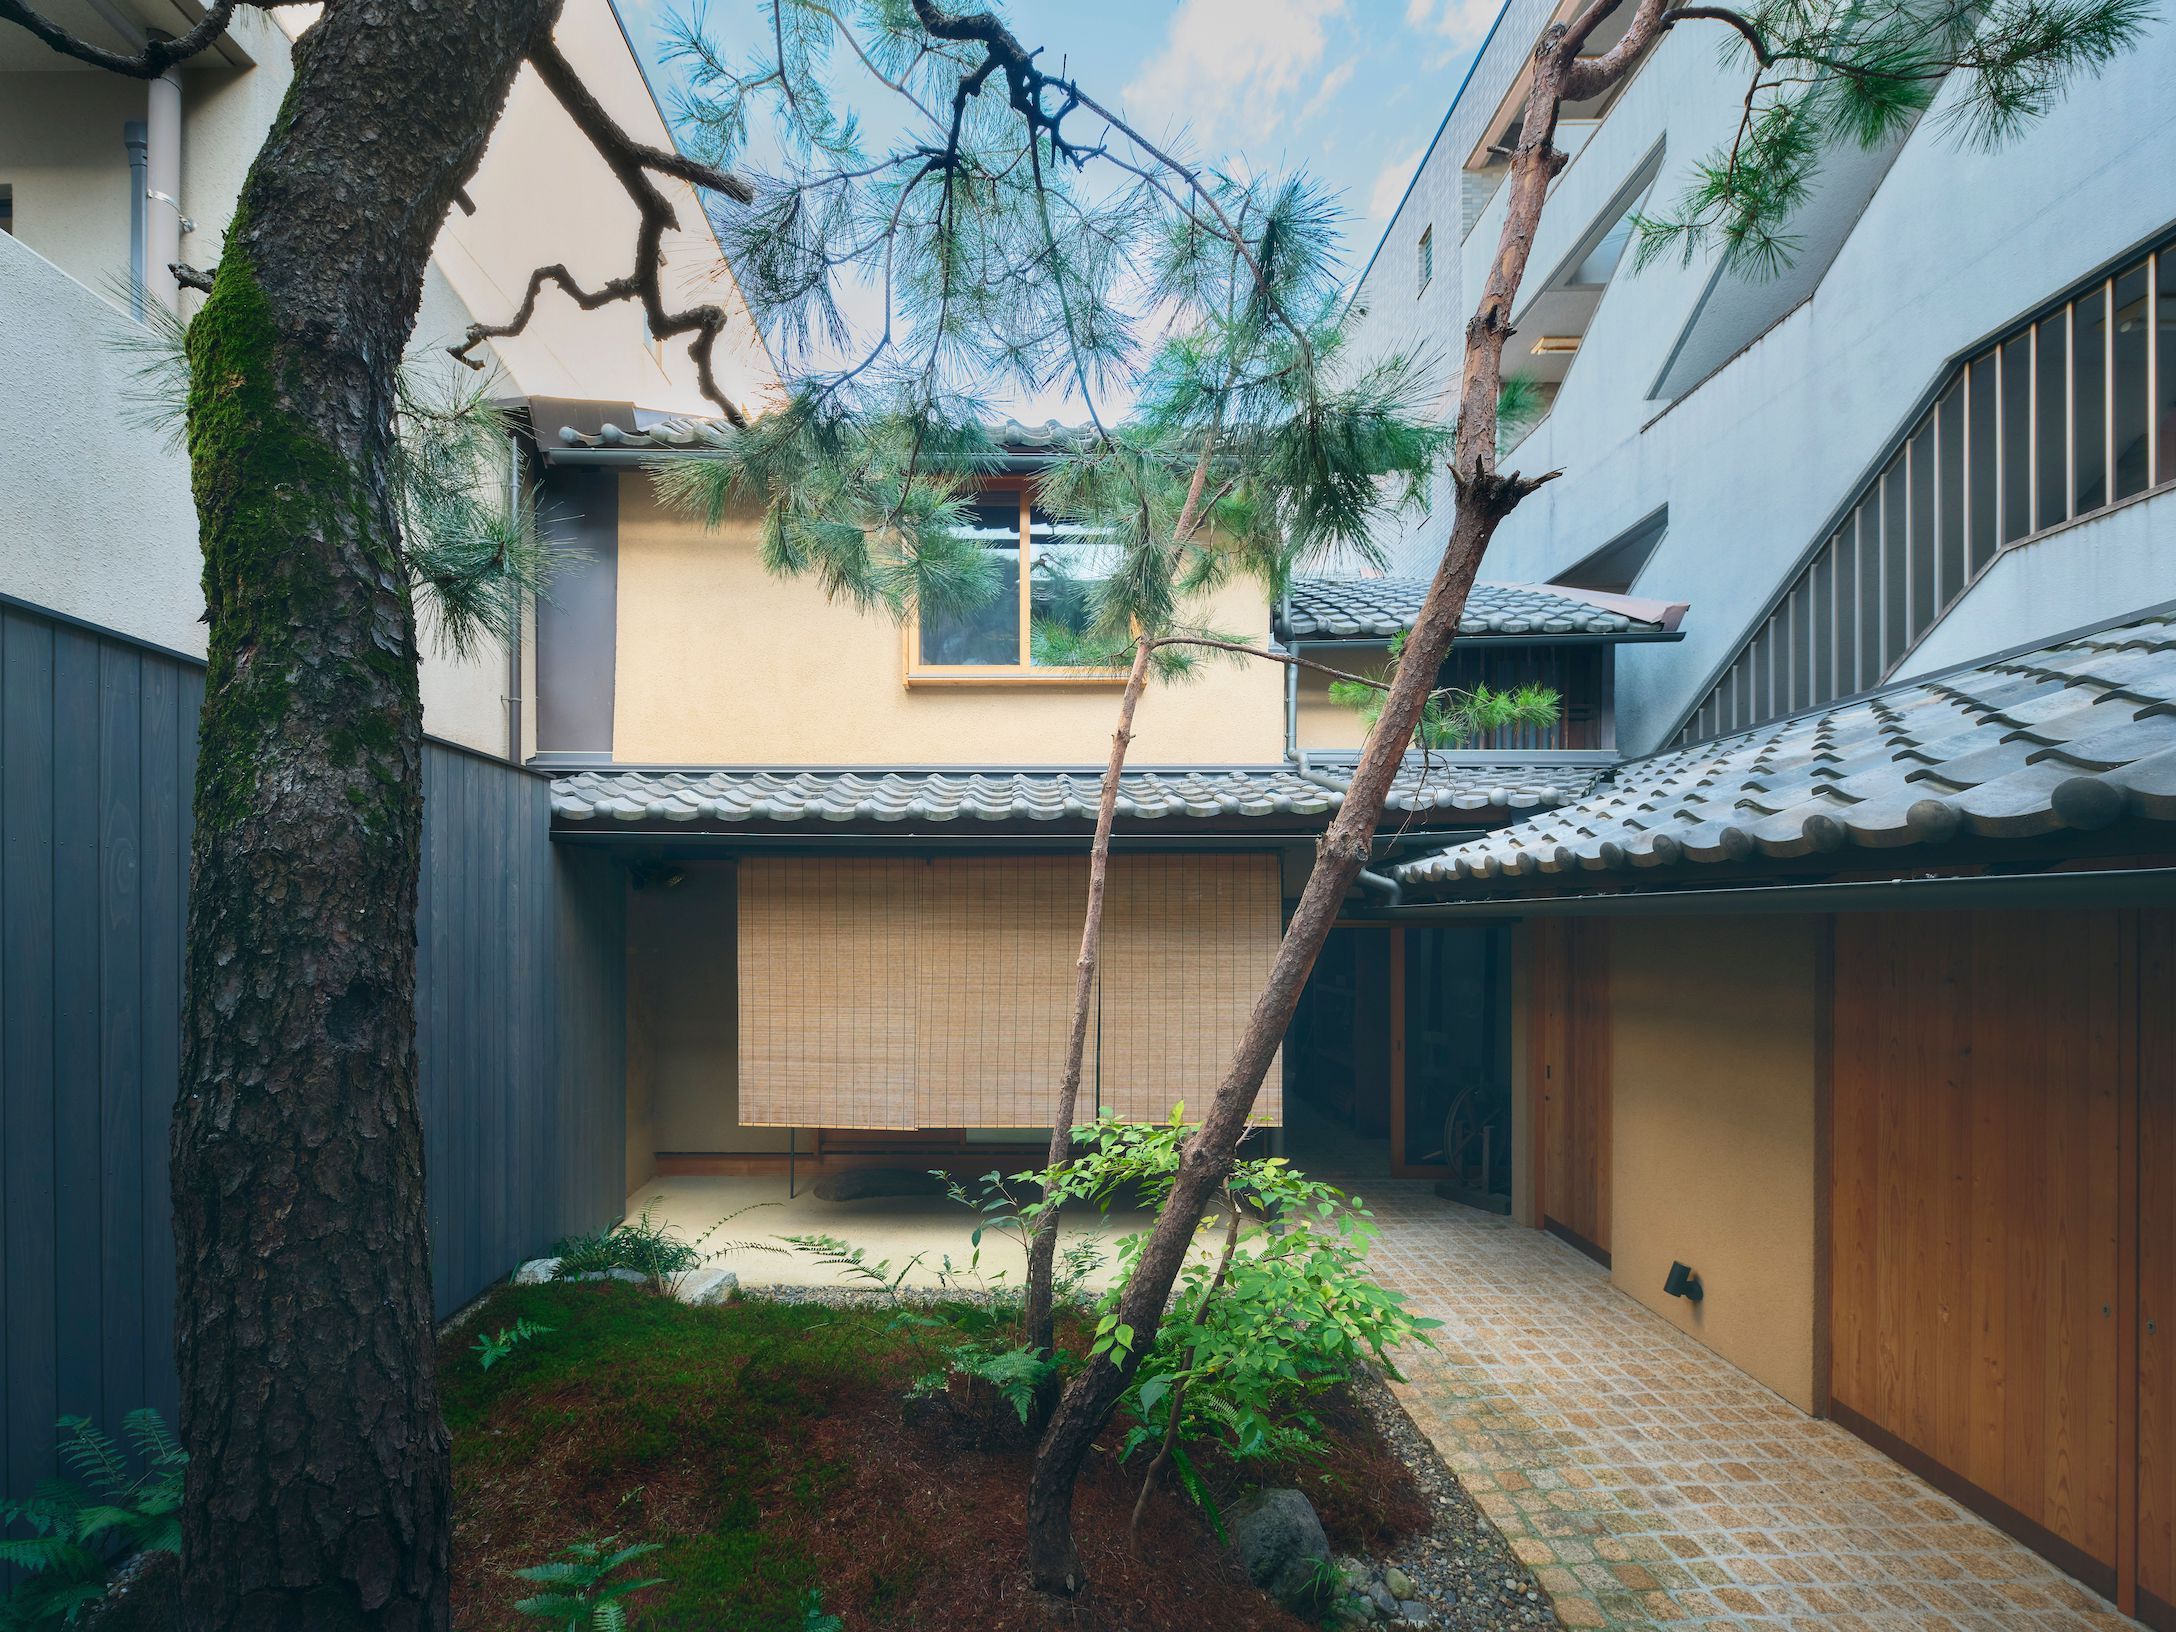 the front and back buildings are divided by a courtyard brought back to life by 10